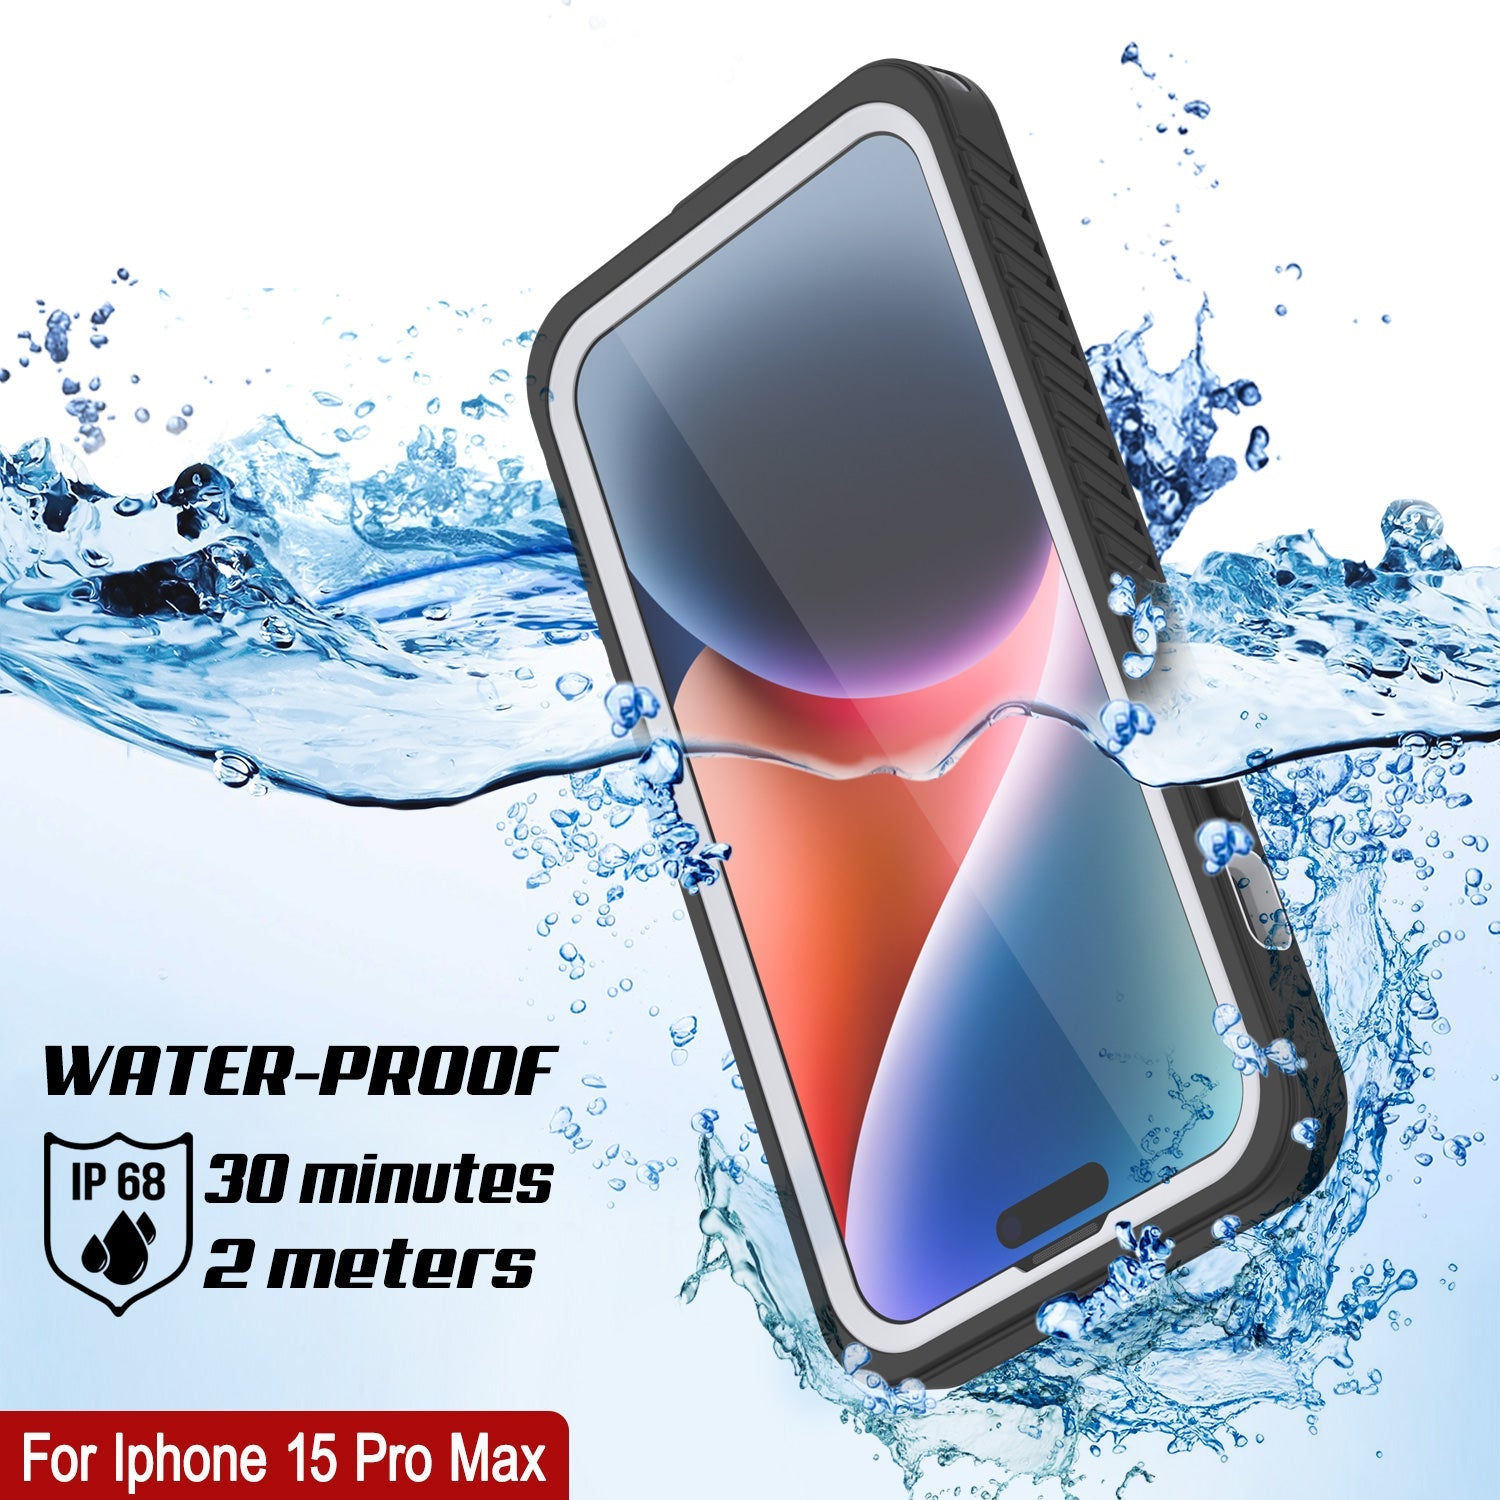 iPhone 15 Pro Max Waterproof Case, Punkcase [Extreme Series] Armor Cover W/ Built In Screen Protector [White]